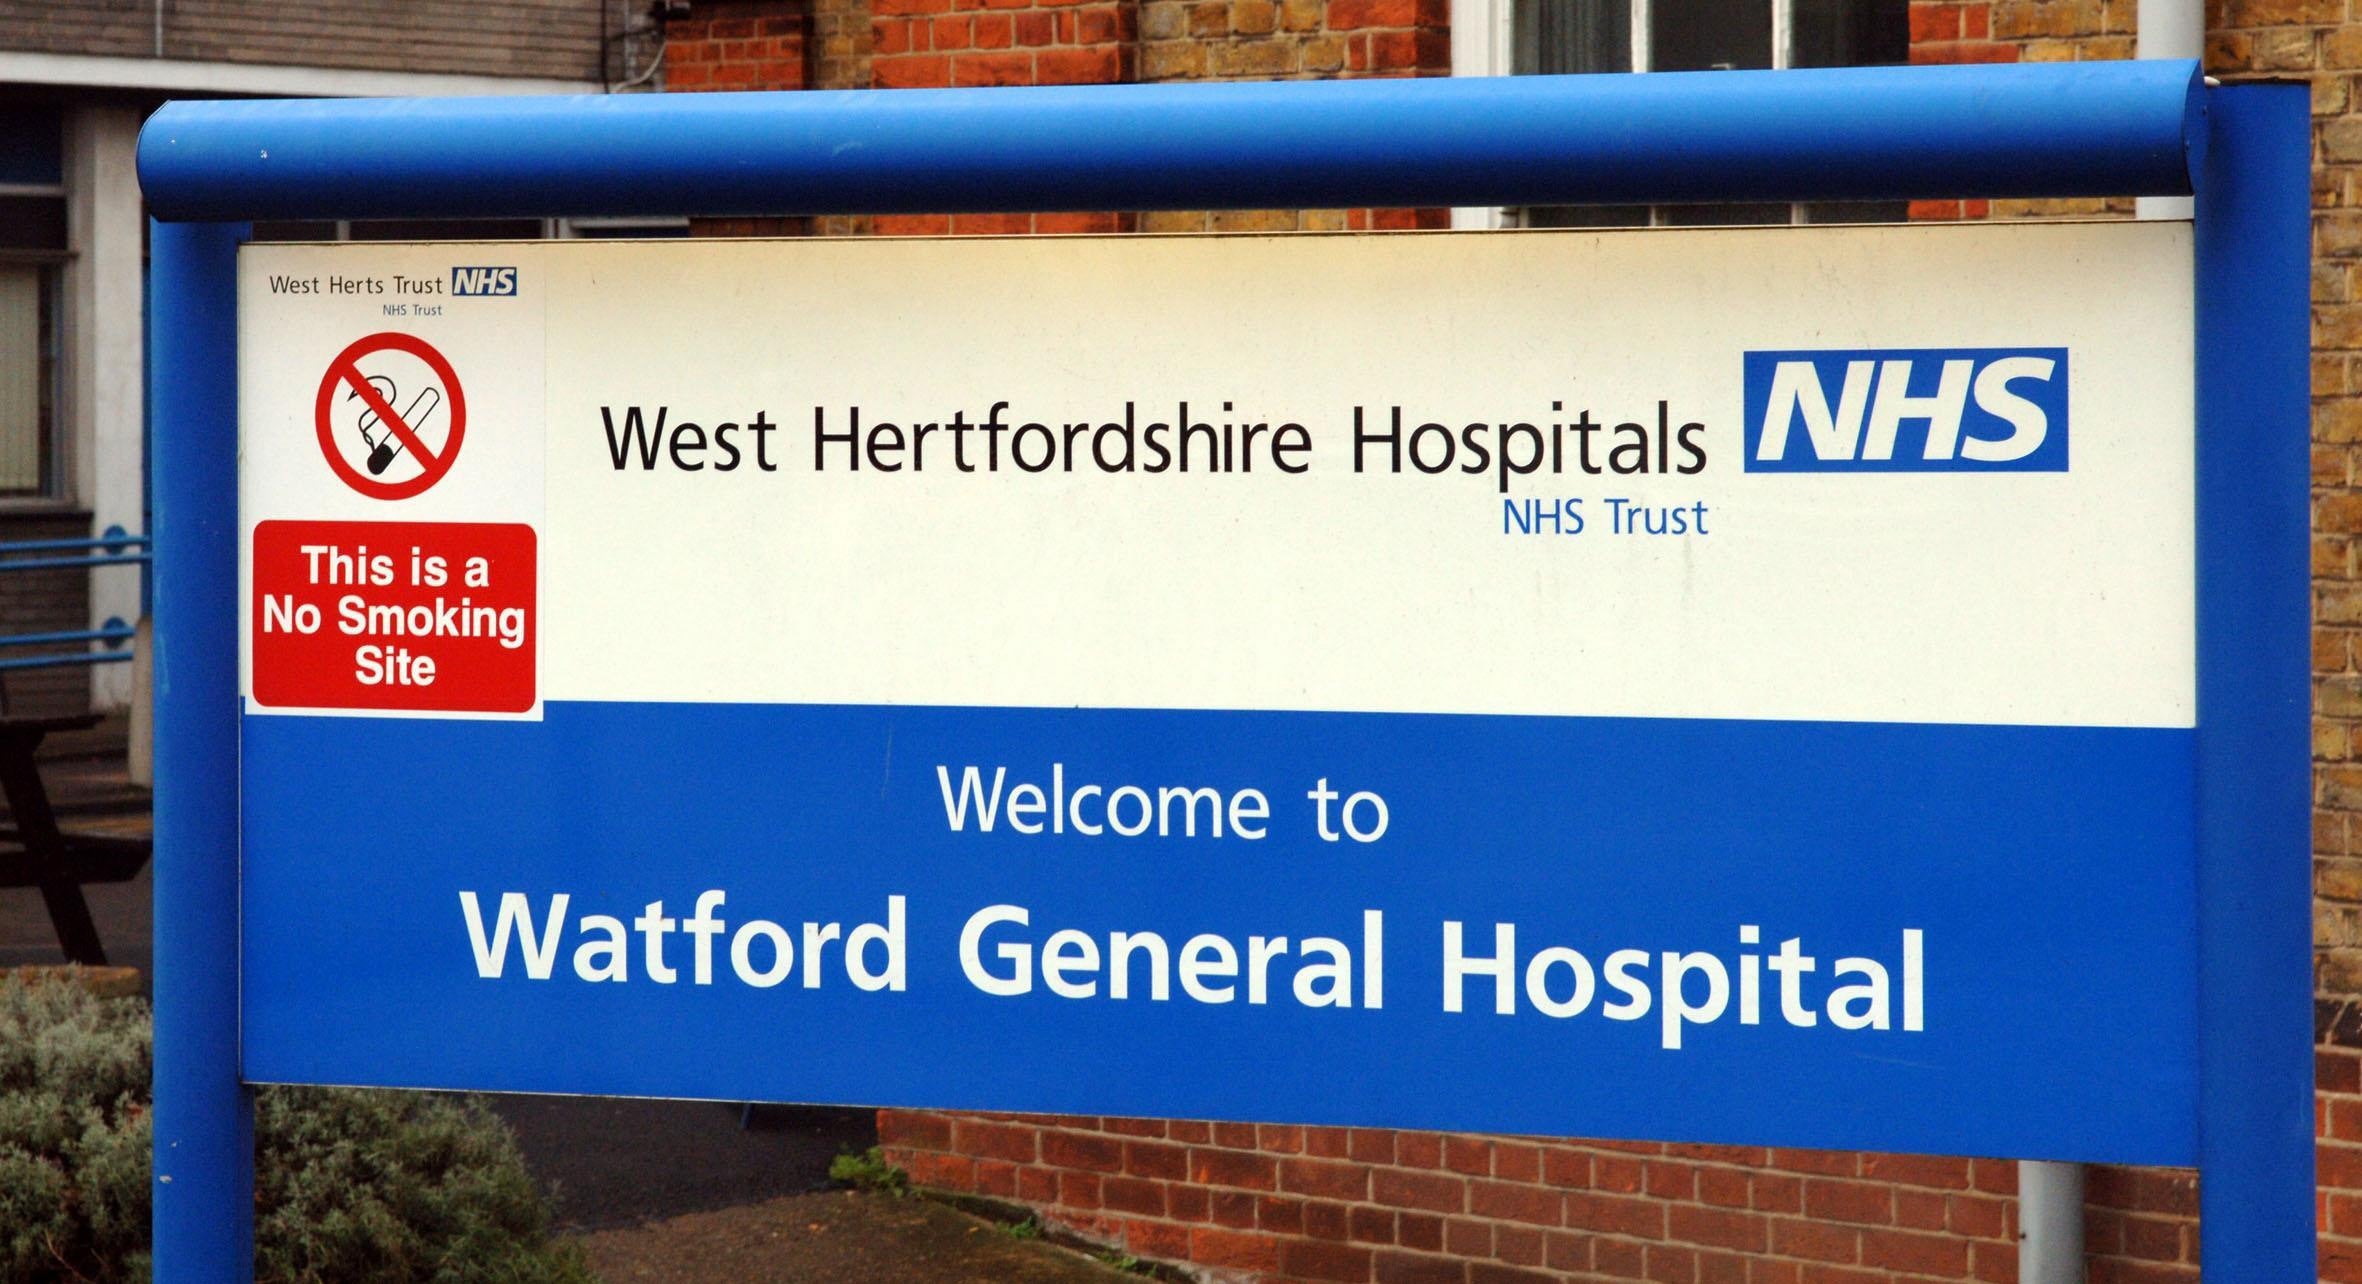 The sign outside Watford General Hospital in Watford, Hertfordshire (PA)